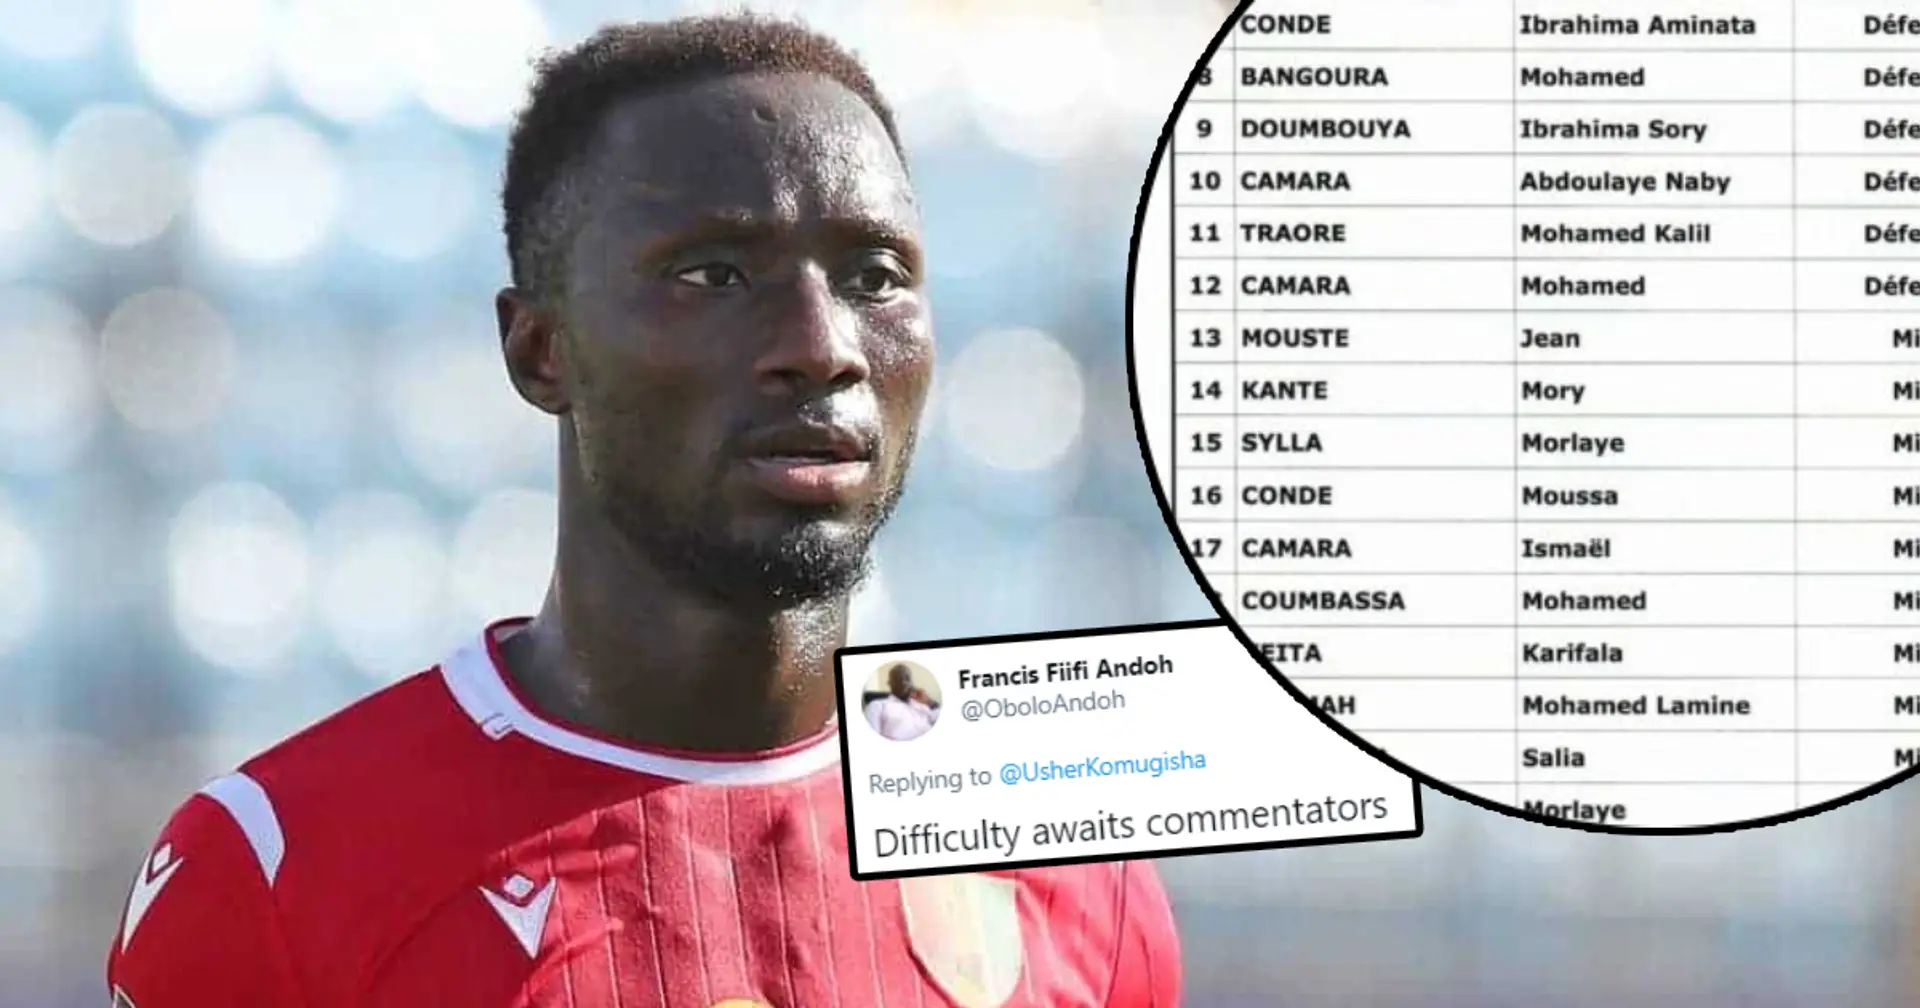 Guinea name 11 players with same surname for upcoming AFCON